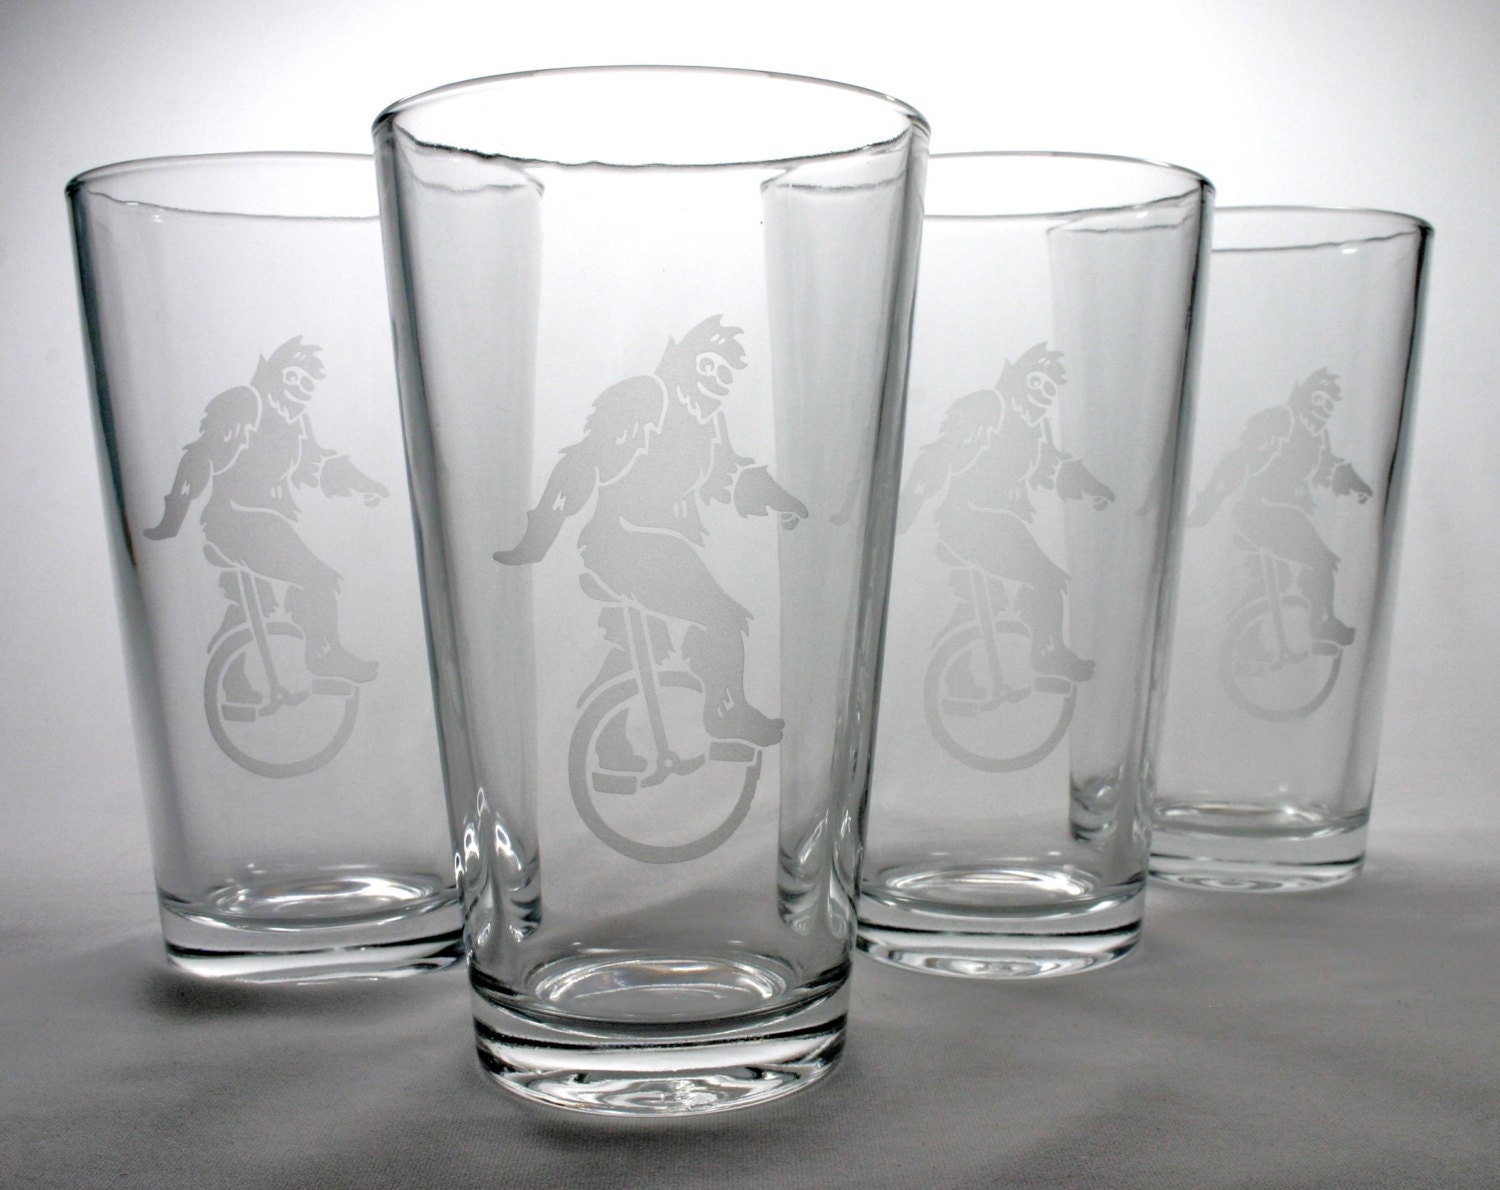 Etched pint glasses